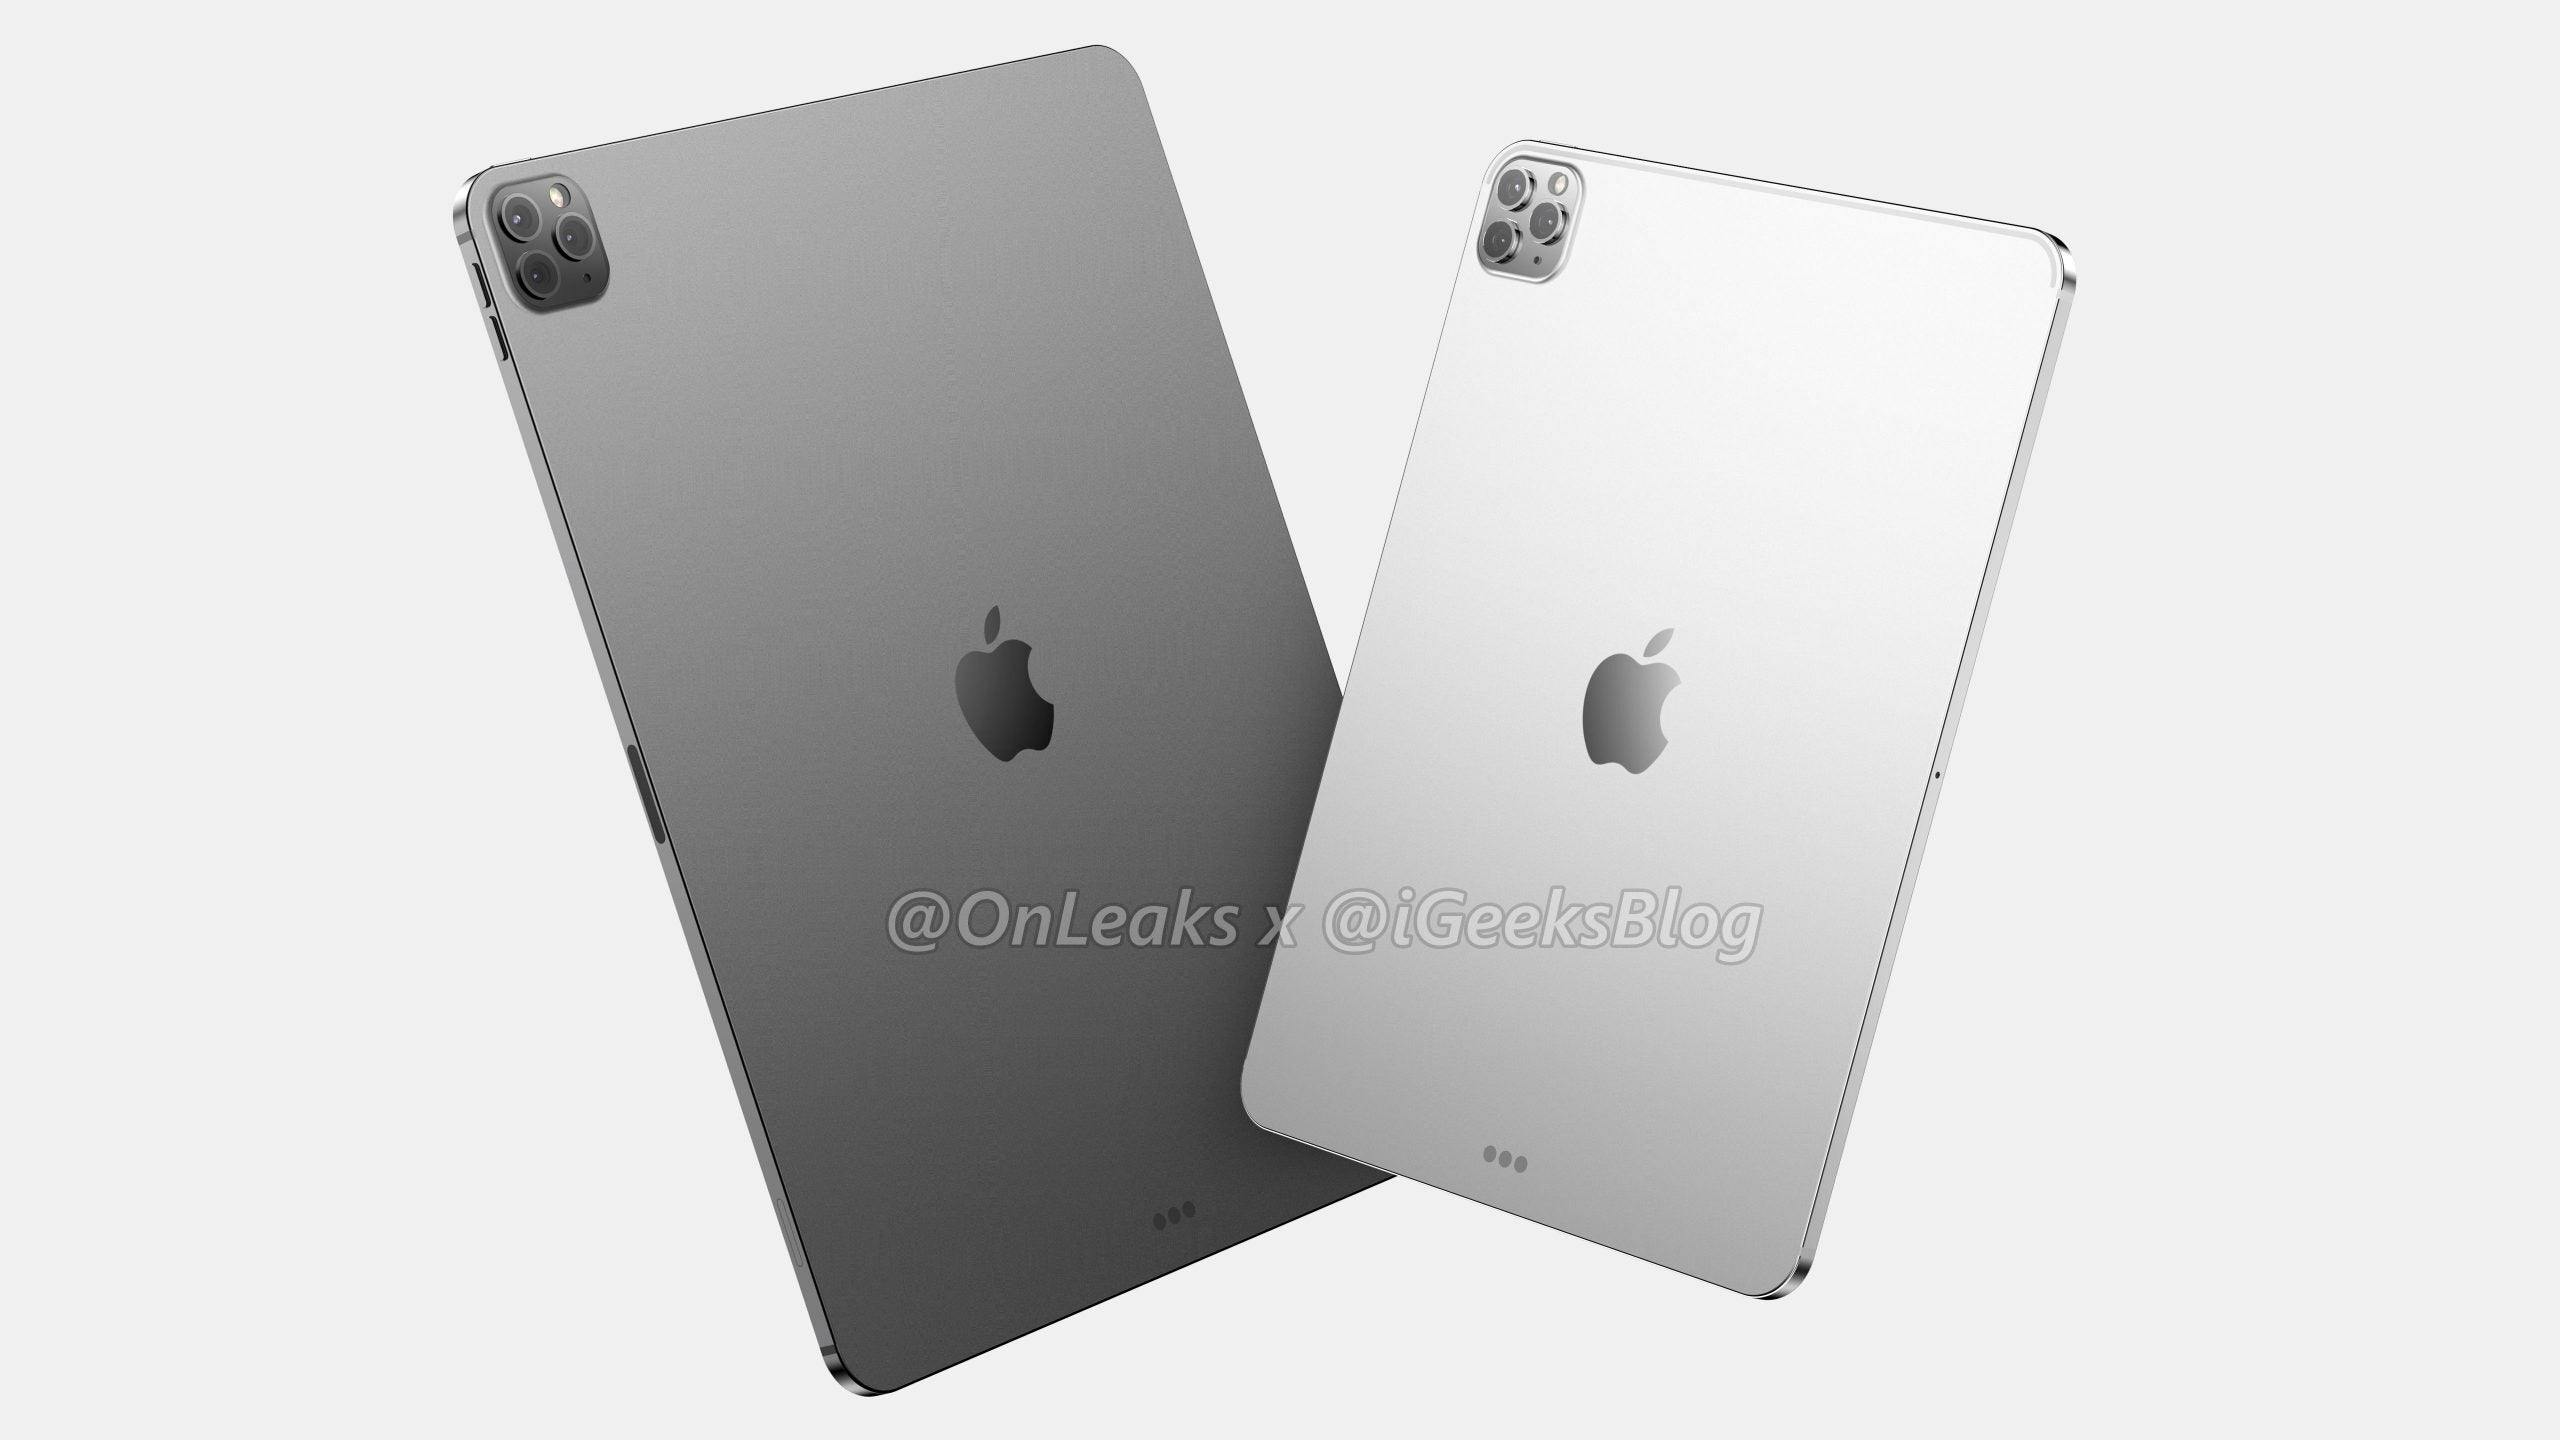 Here's what the Apple iPad Pro 2020 series (probably) looks like